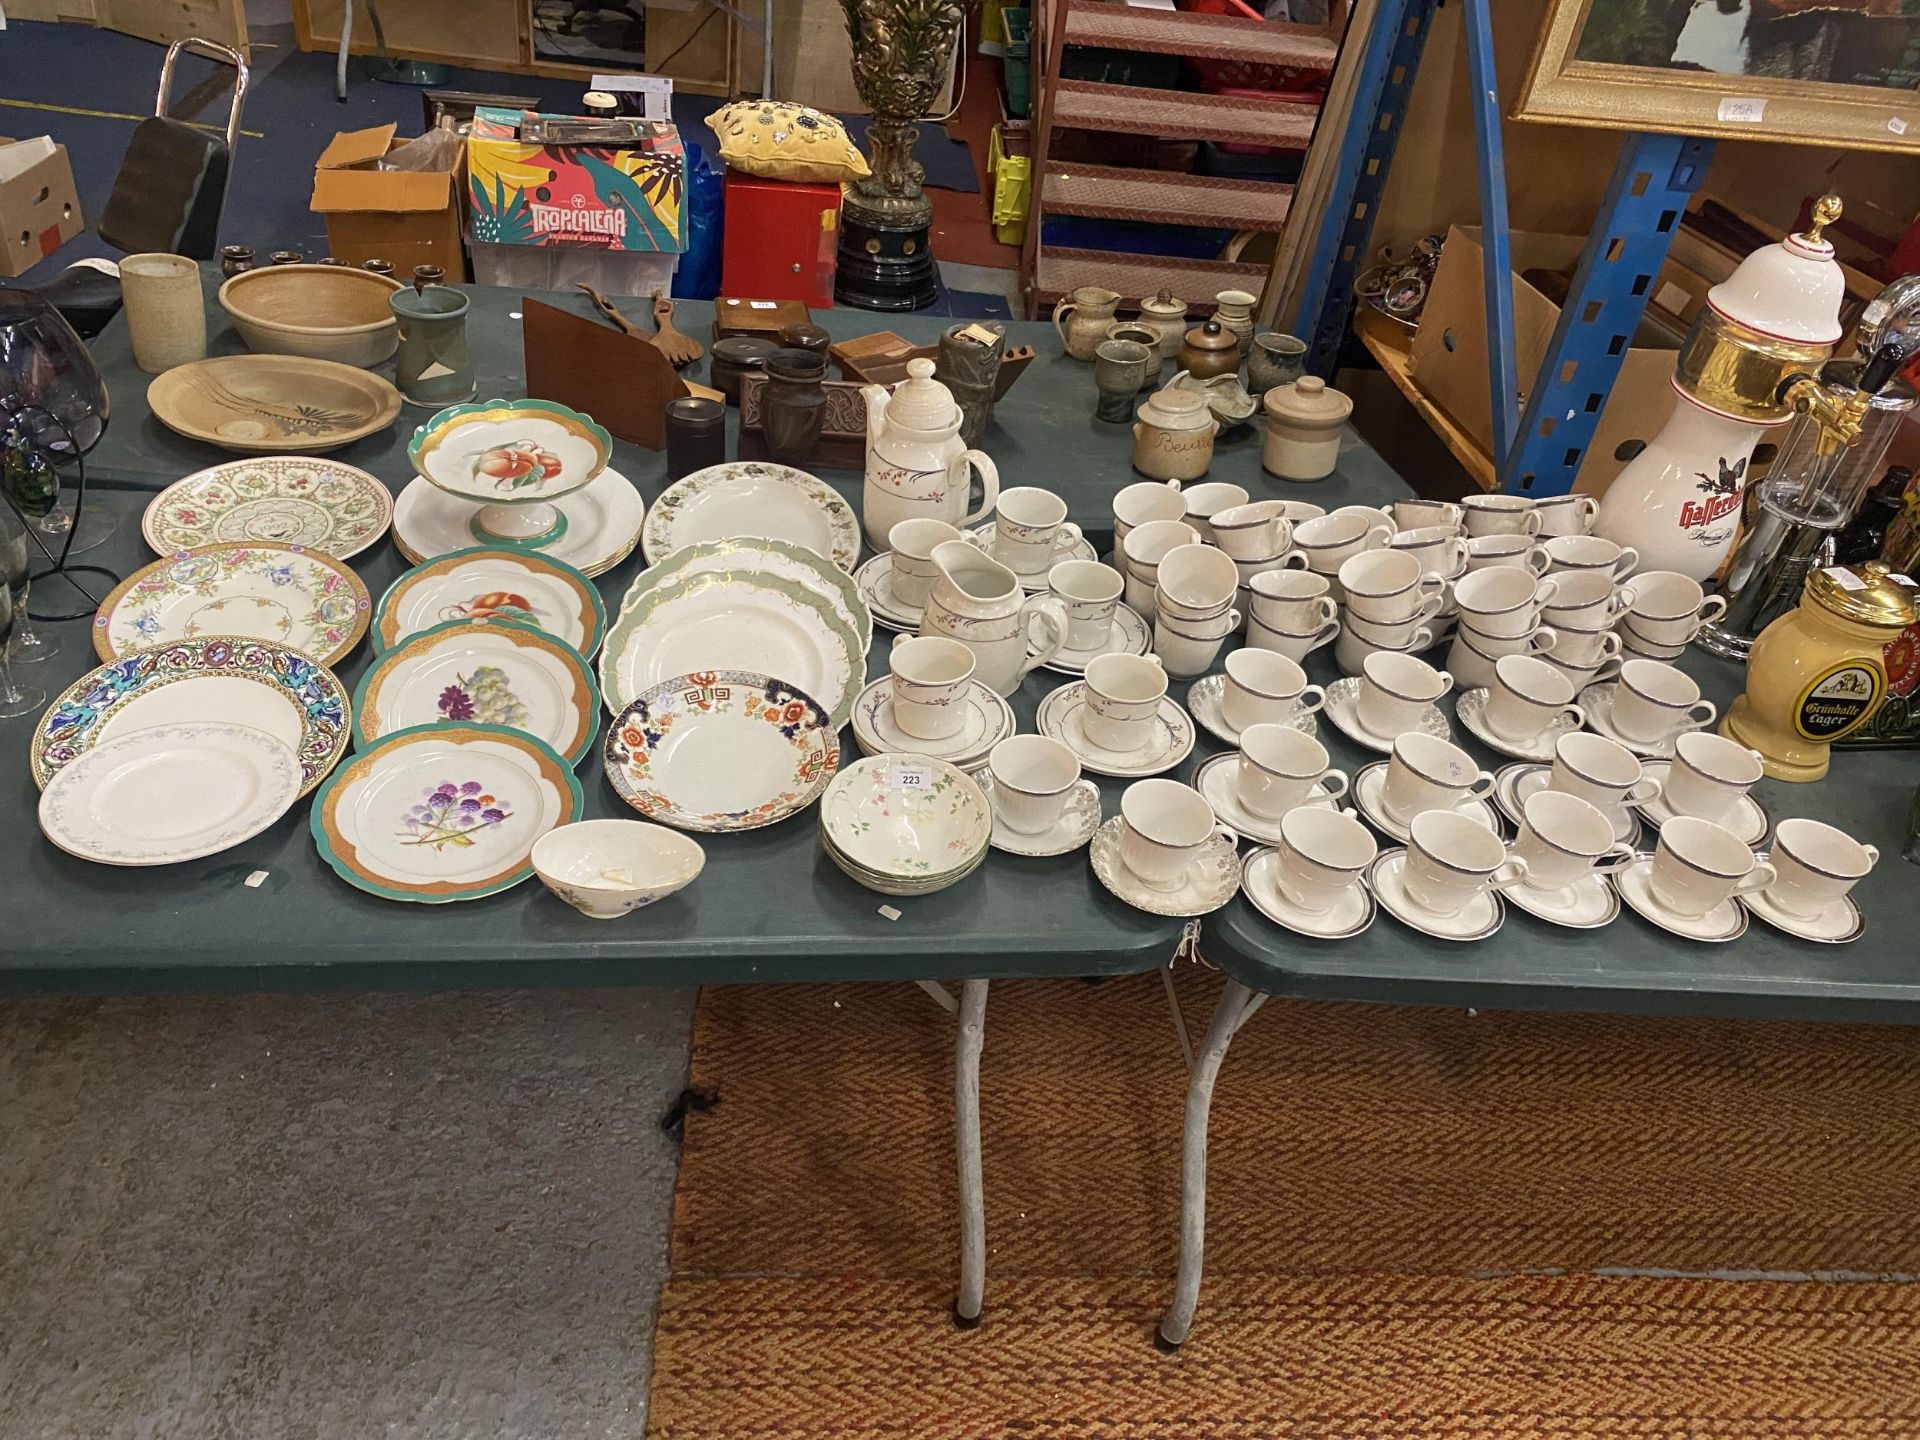 A LARGE QUANTITY OF PREDOMINENTLY ROYAL DOULTON TABLEWARE TO INCLUDE CUPS, SAUCERS, A GREENWICH